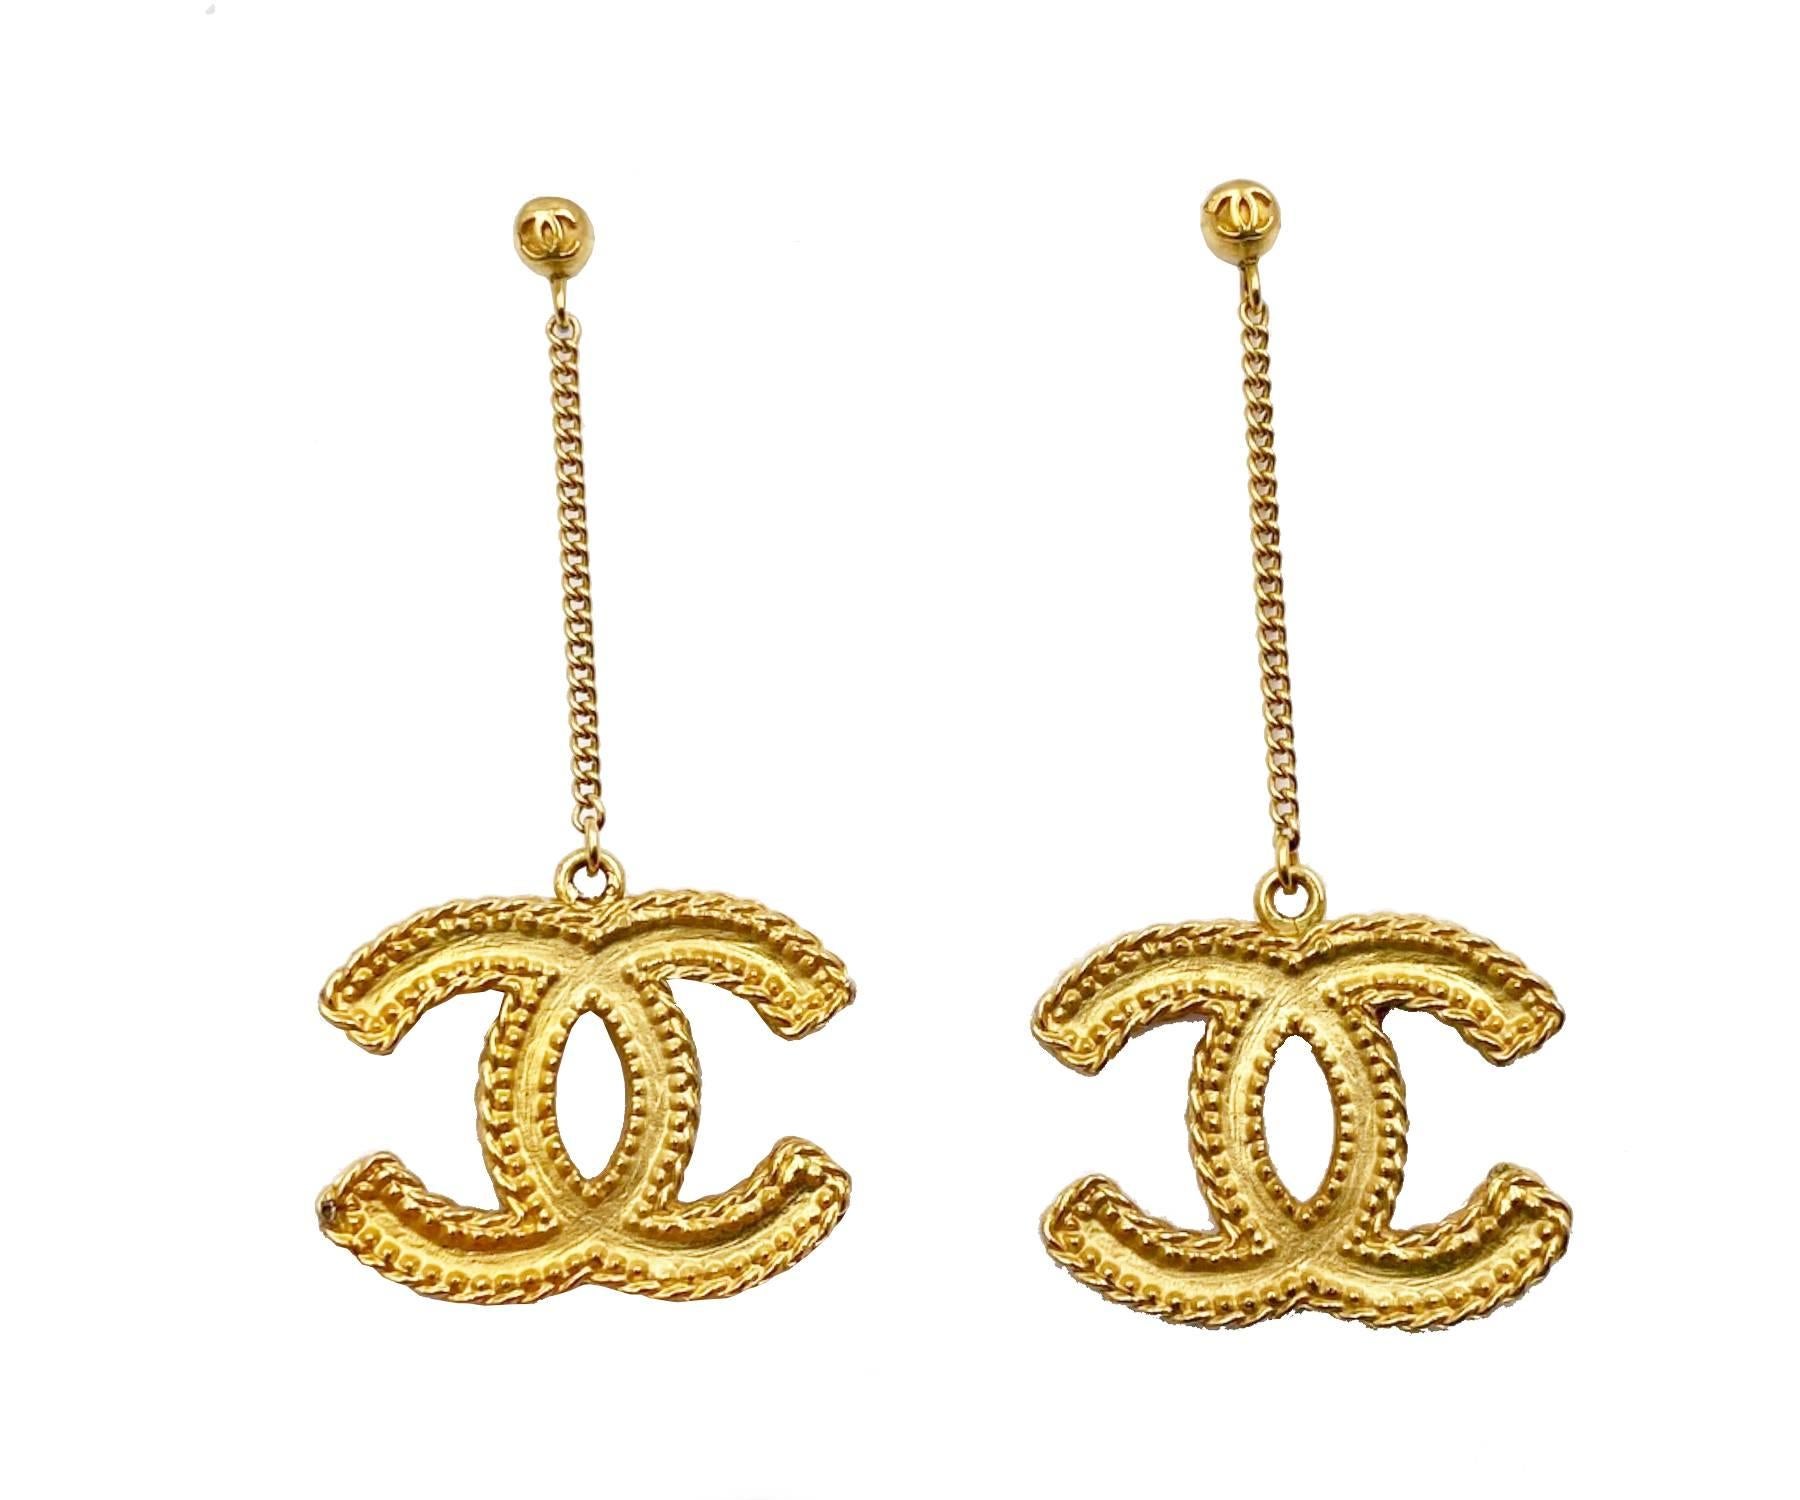 Chanel Classic Gold CC Dangle Piercing Earrings

*Marked 16
*Made in Italy
*Comes with the  original box and pouch
-As seen on Jamie Chung

-It's approximately 1.25